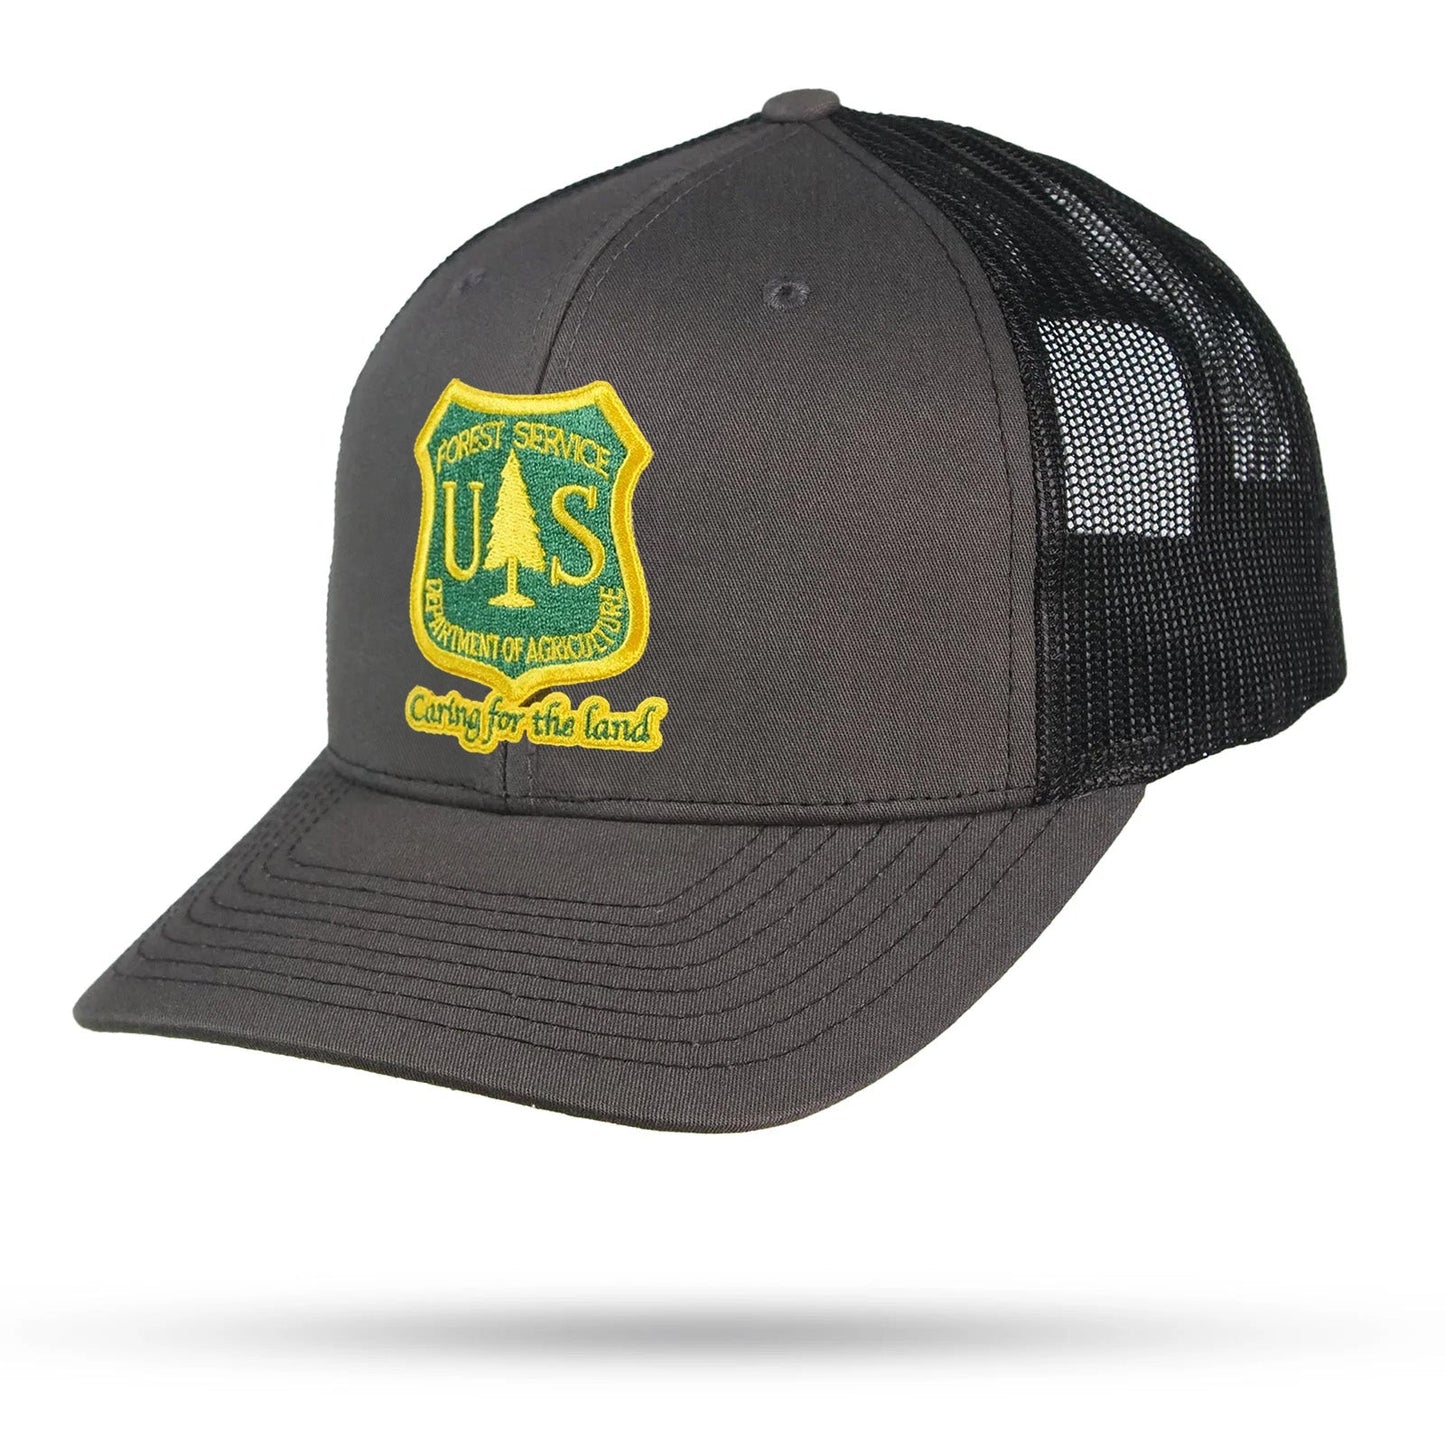 USFS Caring for the Land Trucker Snapback Embroidered Patch - WYR